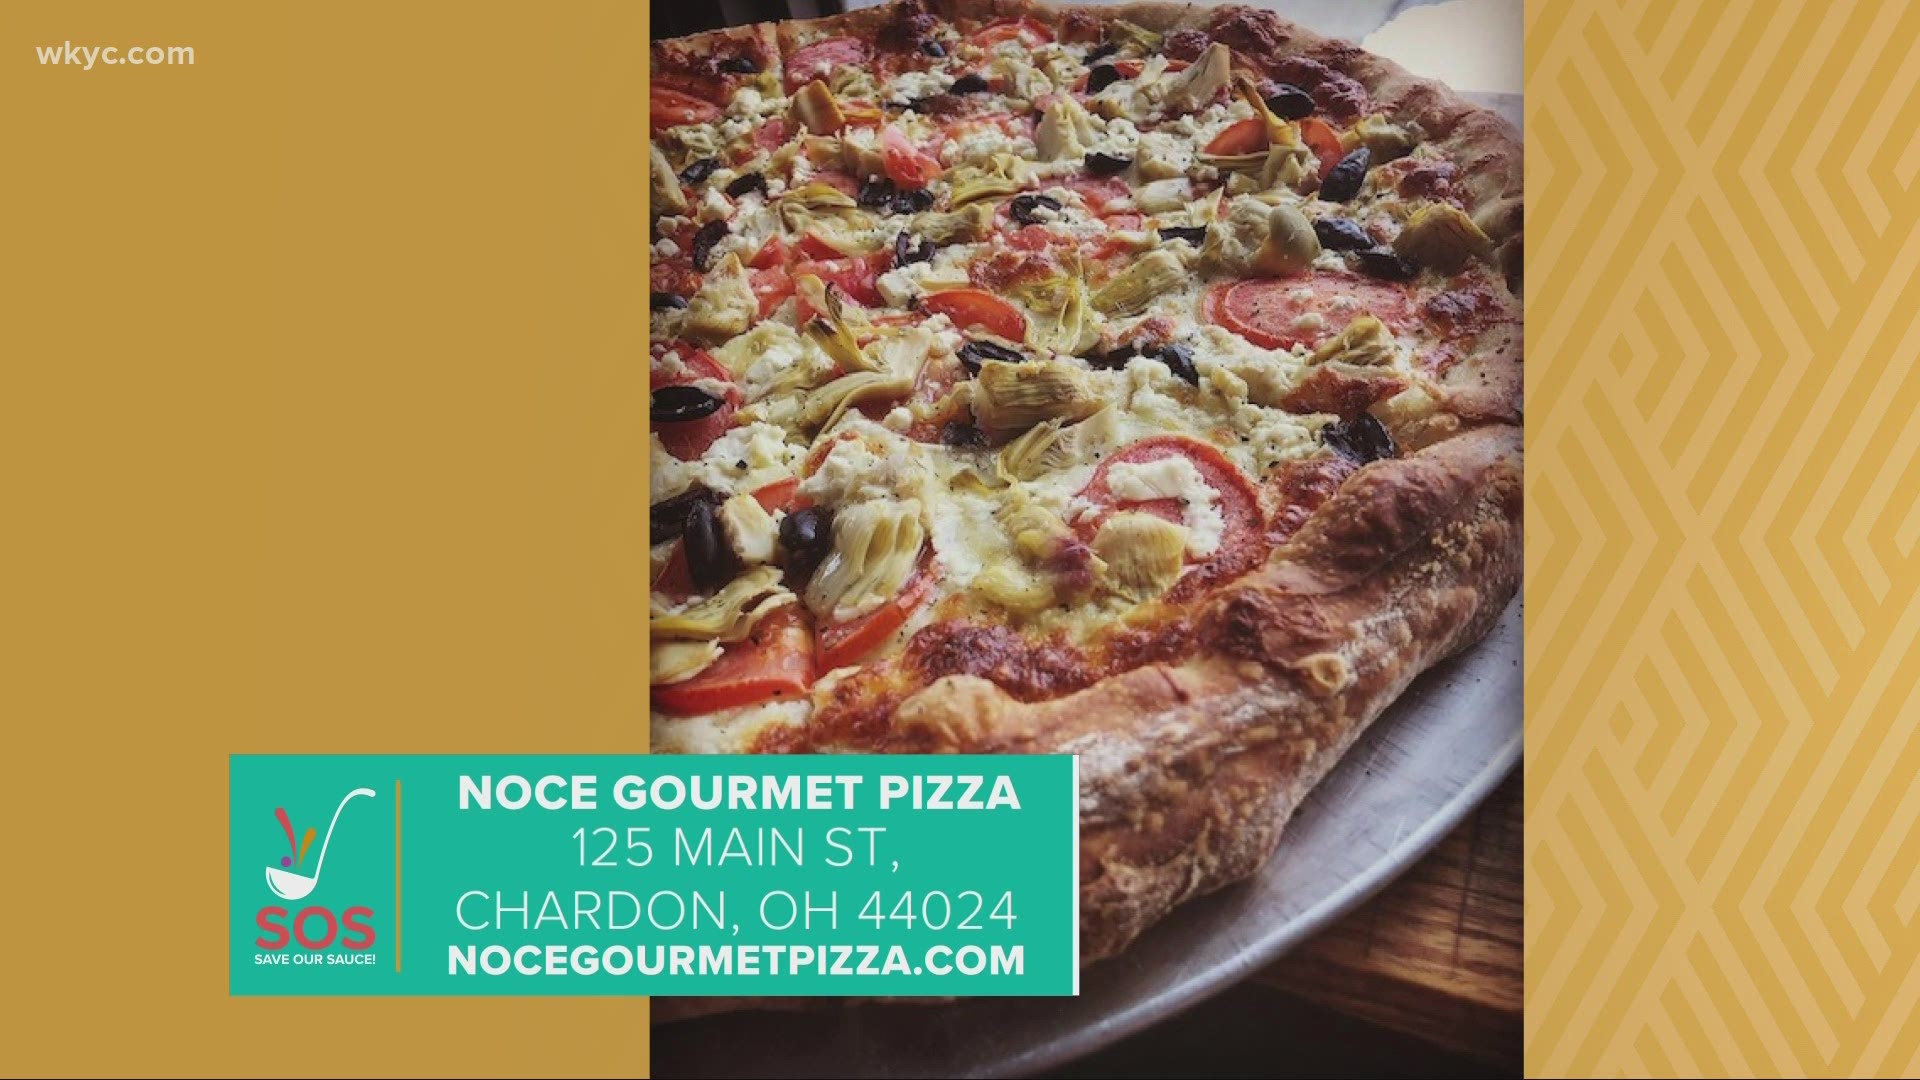 Looking for some great pizza in Northeast Ohio? Doug Trattner has recommendations. Check out the full list at wkyc.com.